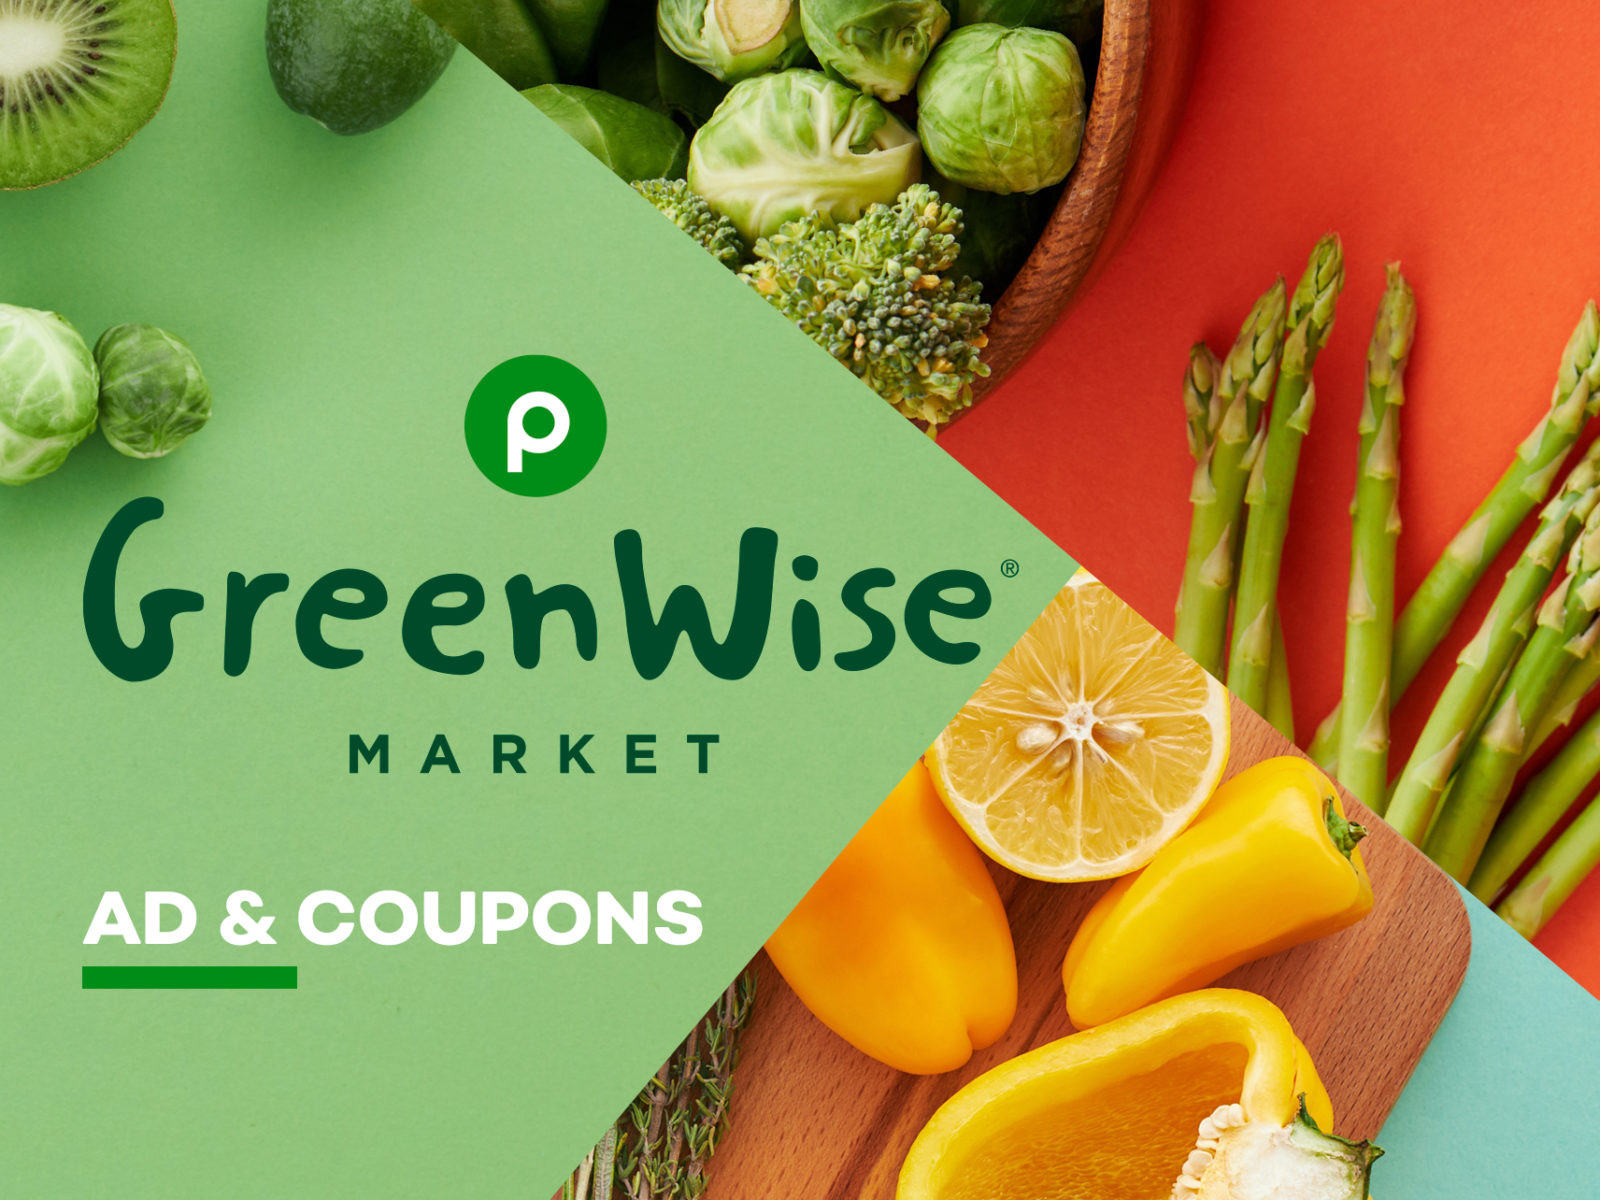 Publix GreenWise Market Ad & Coupons Week Of 11/16 To 11/22 (11/15 to 11/22 for some)